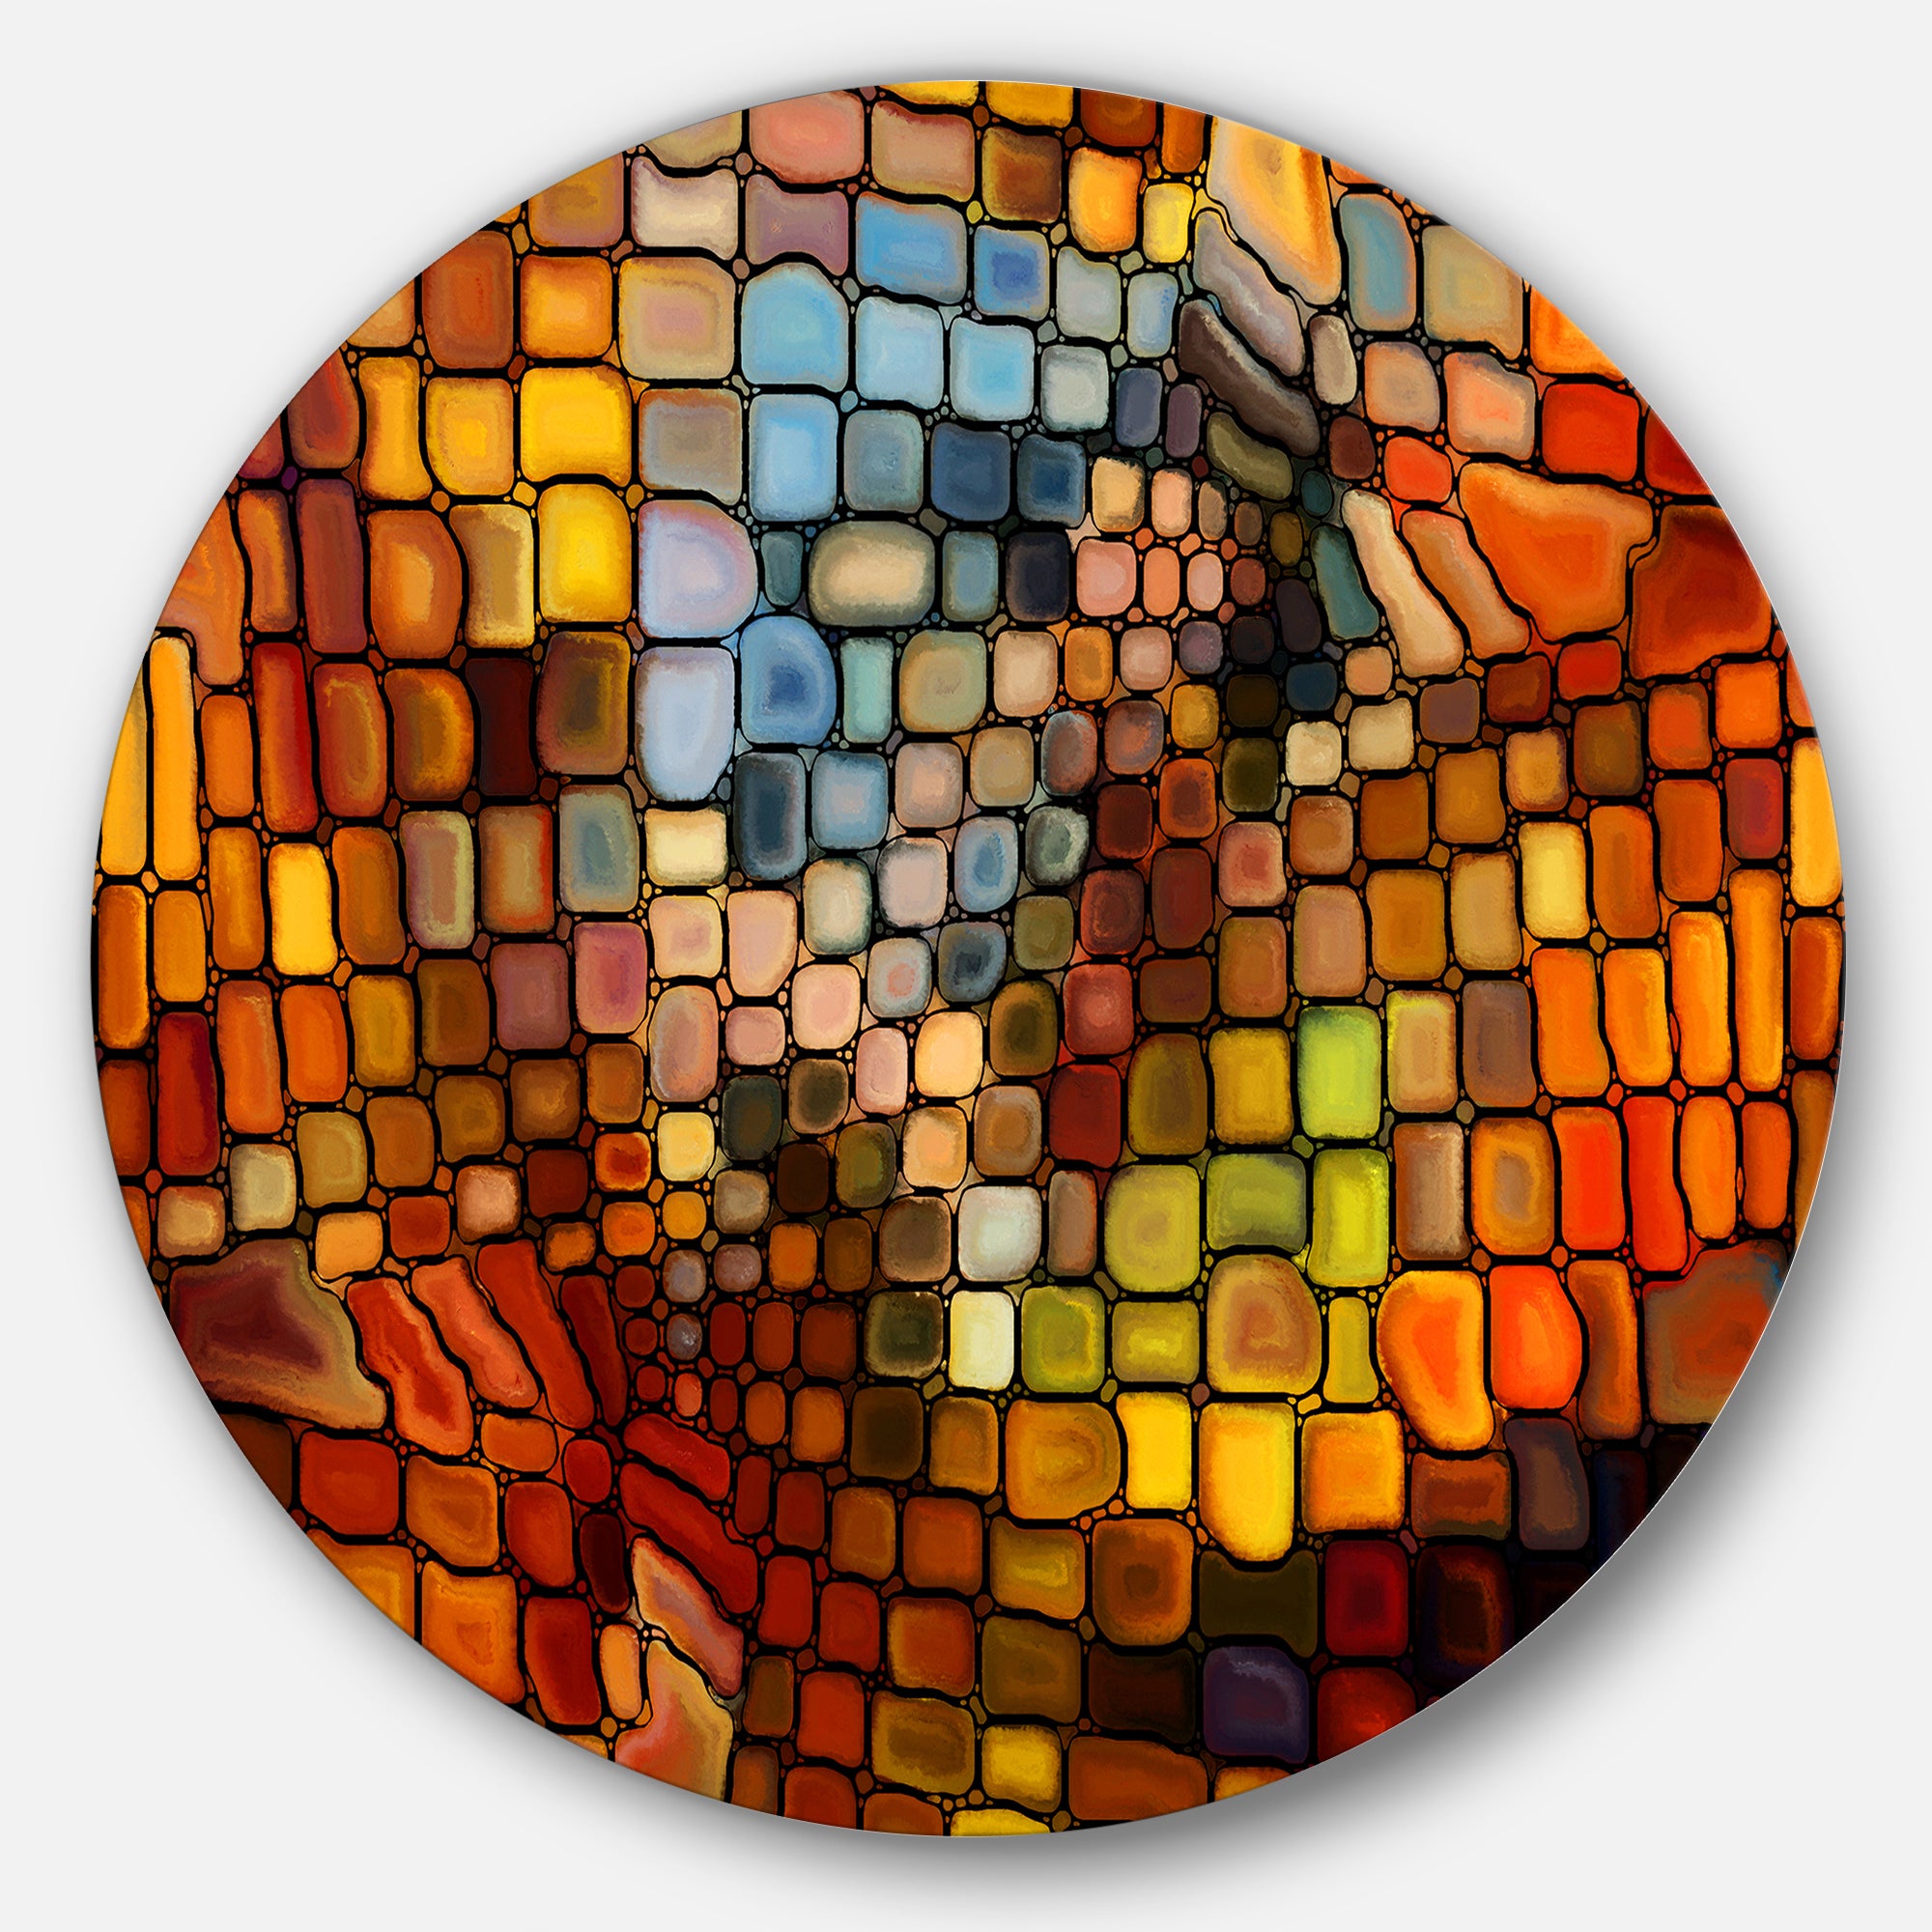 Dreaming of Stained Glass' Abstract Metal Artwork